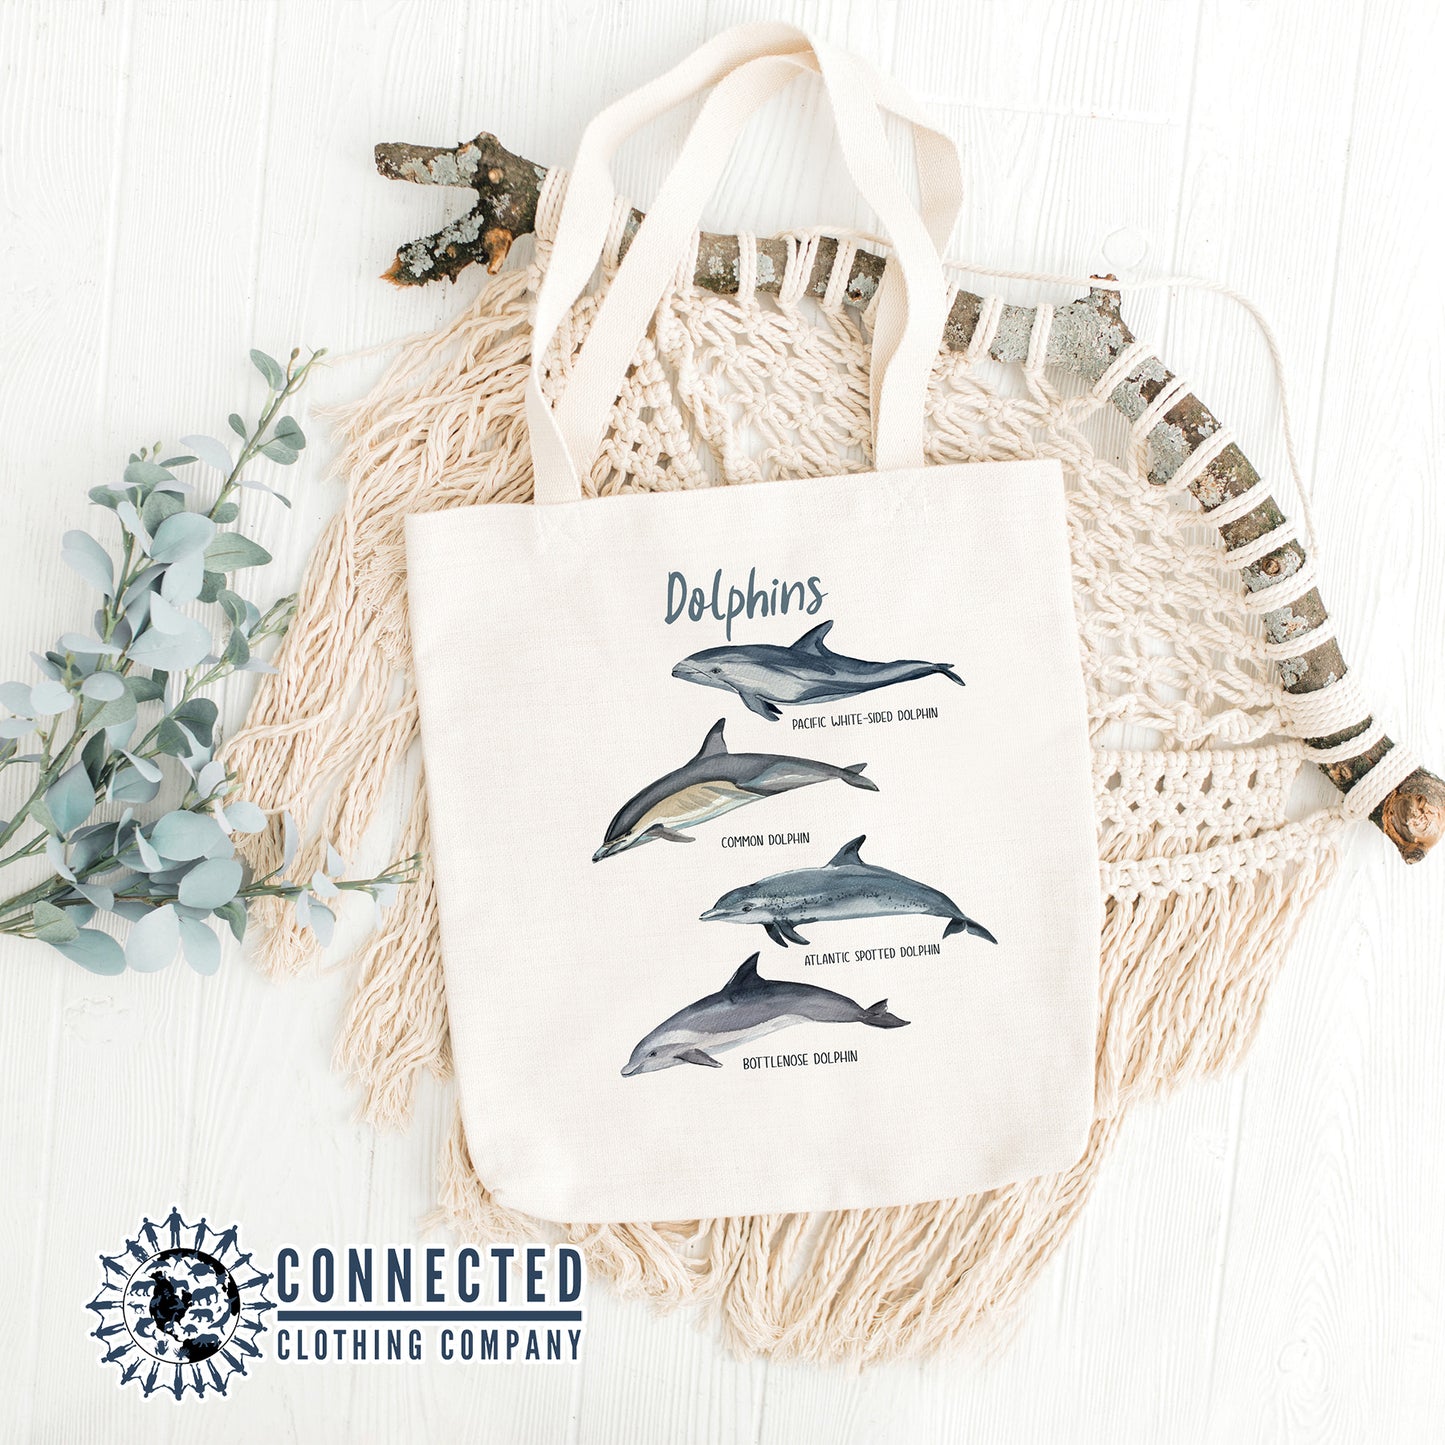 Dolphin Watercolor Tote Bag - Connected Clothing Company - 10% of proceeds donated to ocean conservation